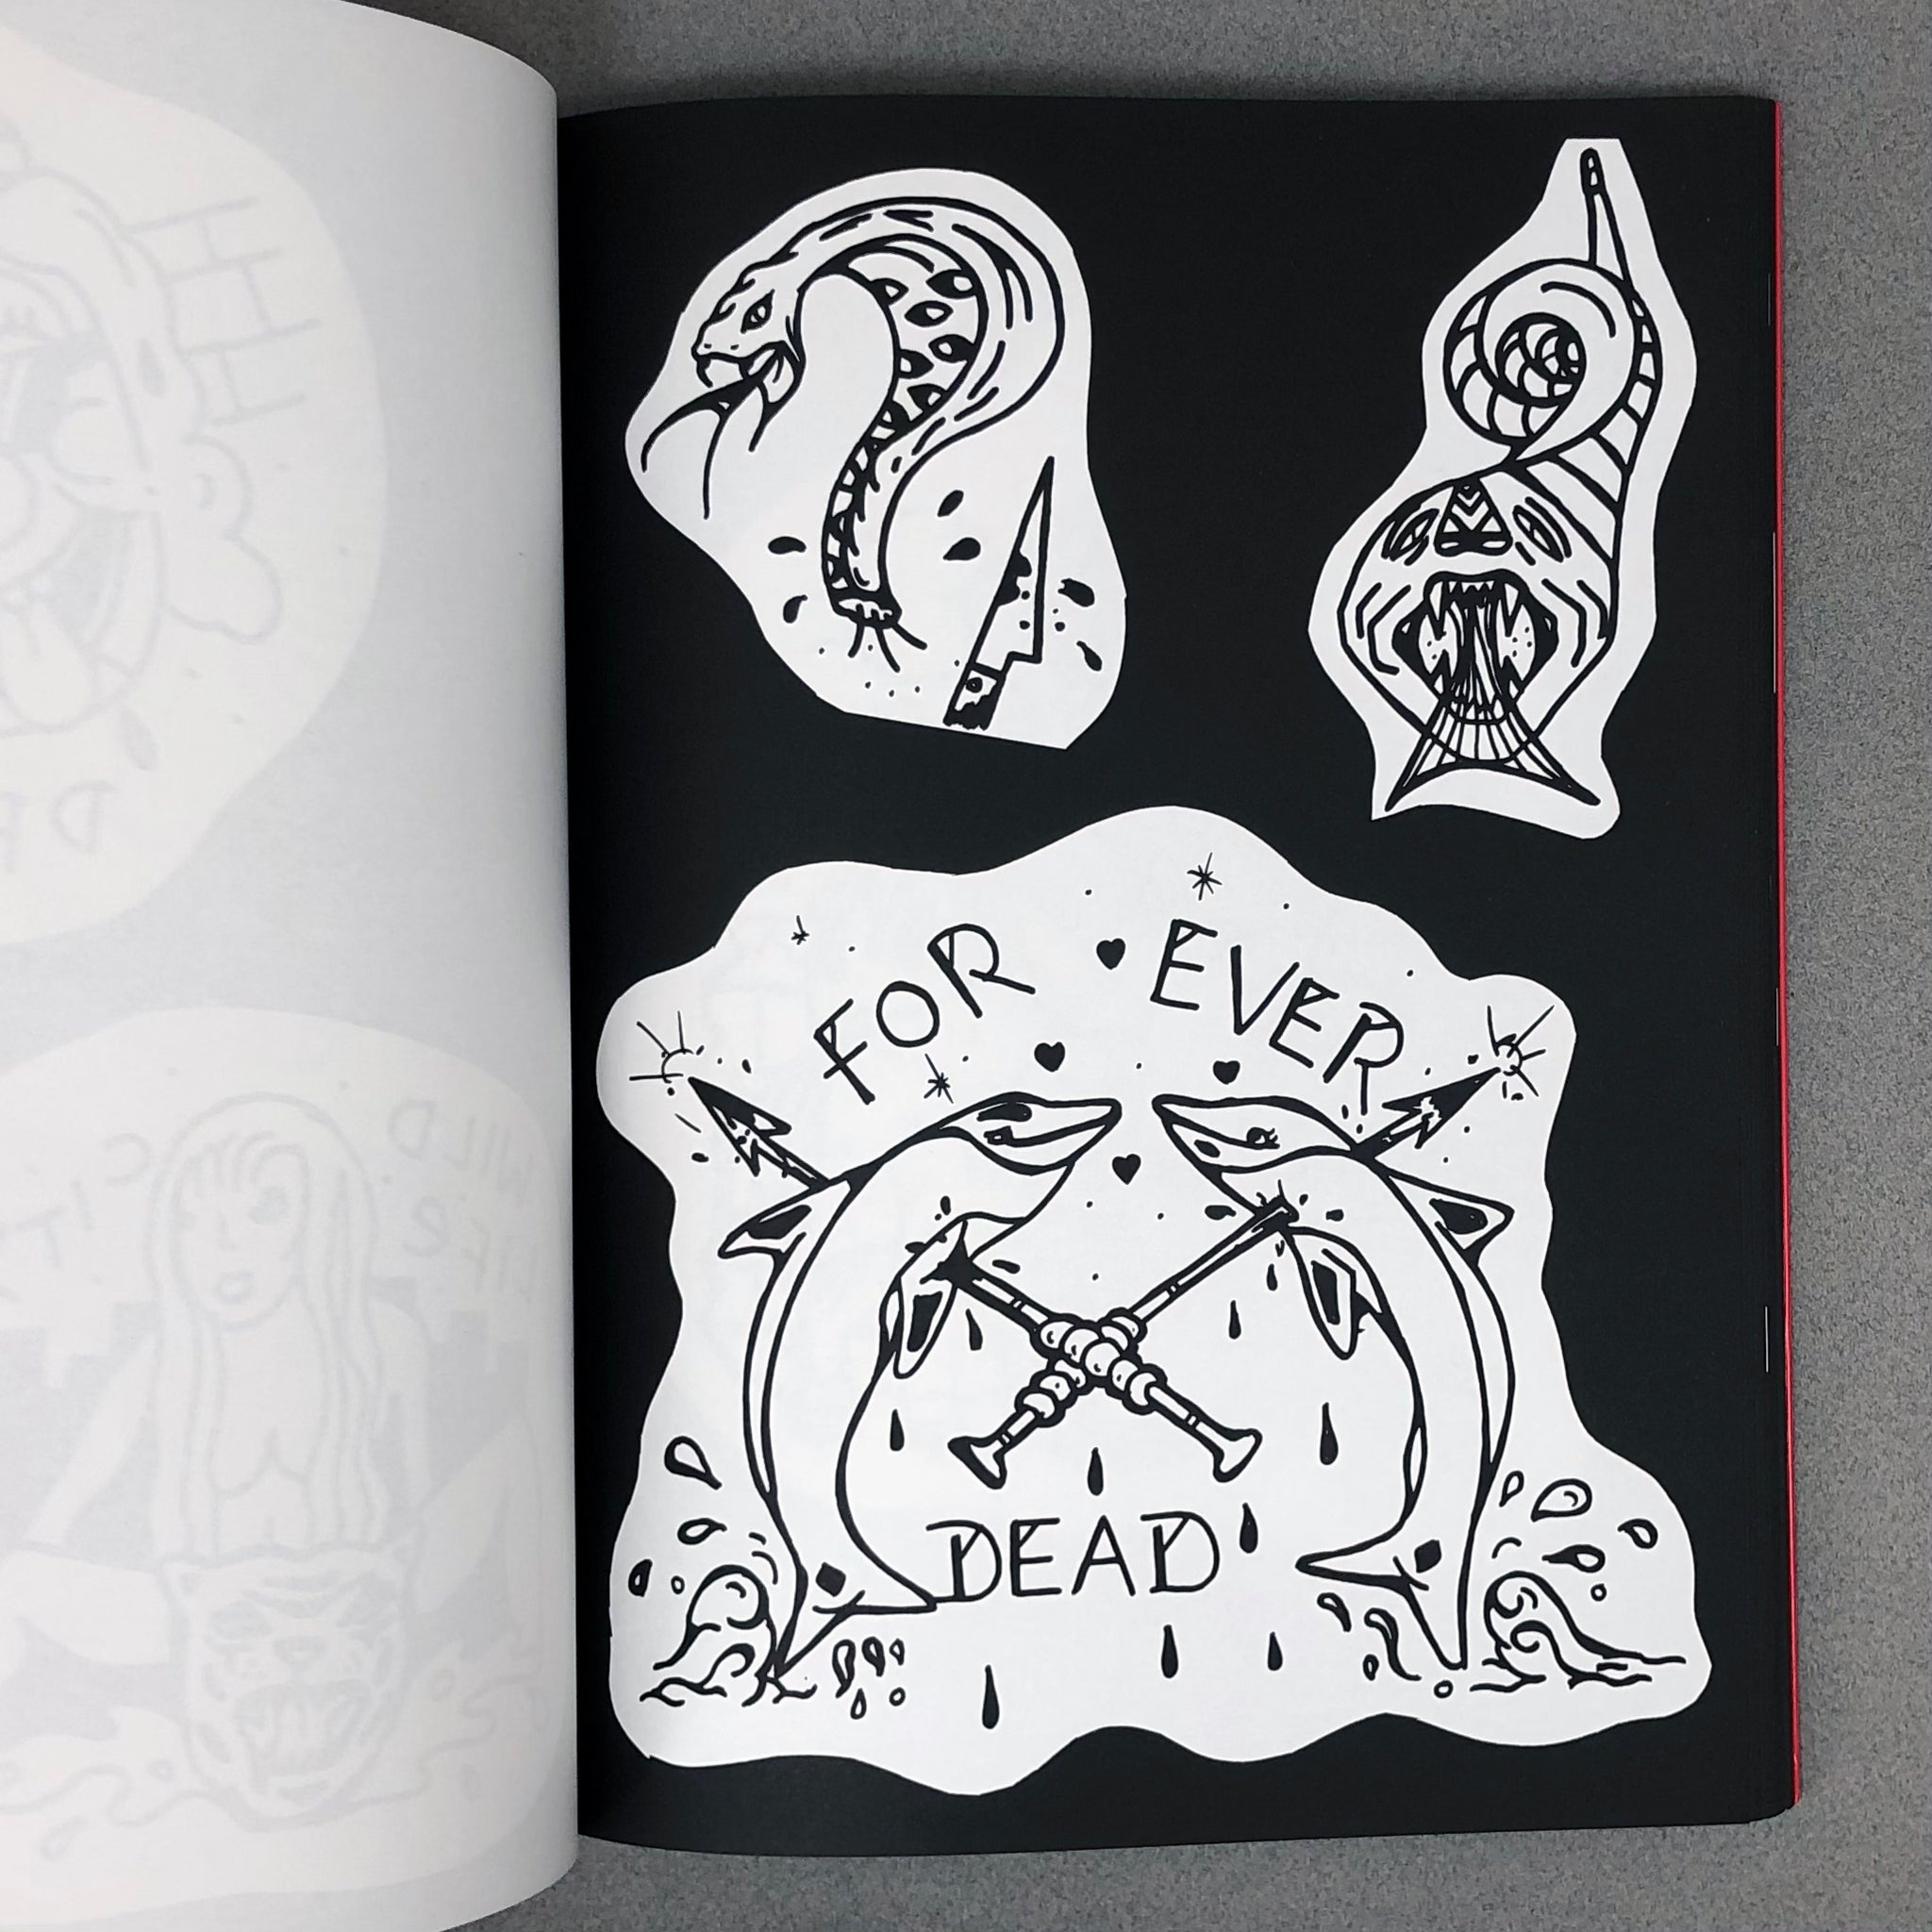 Discover our new collection of ephemeral tattoos: Funny Lovely!